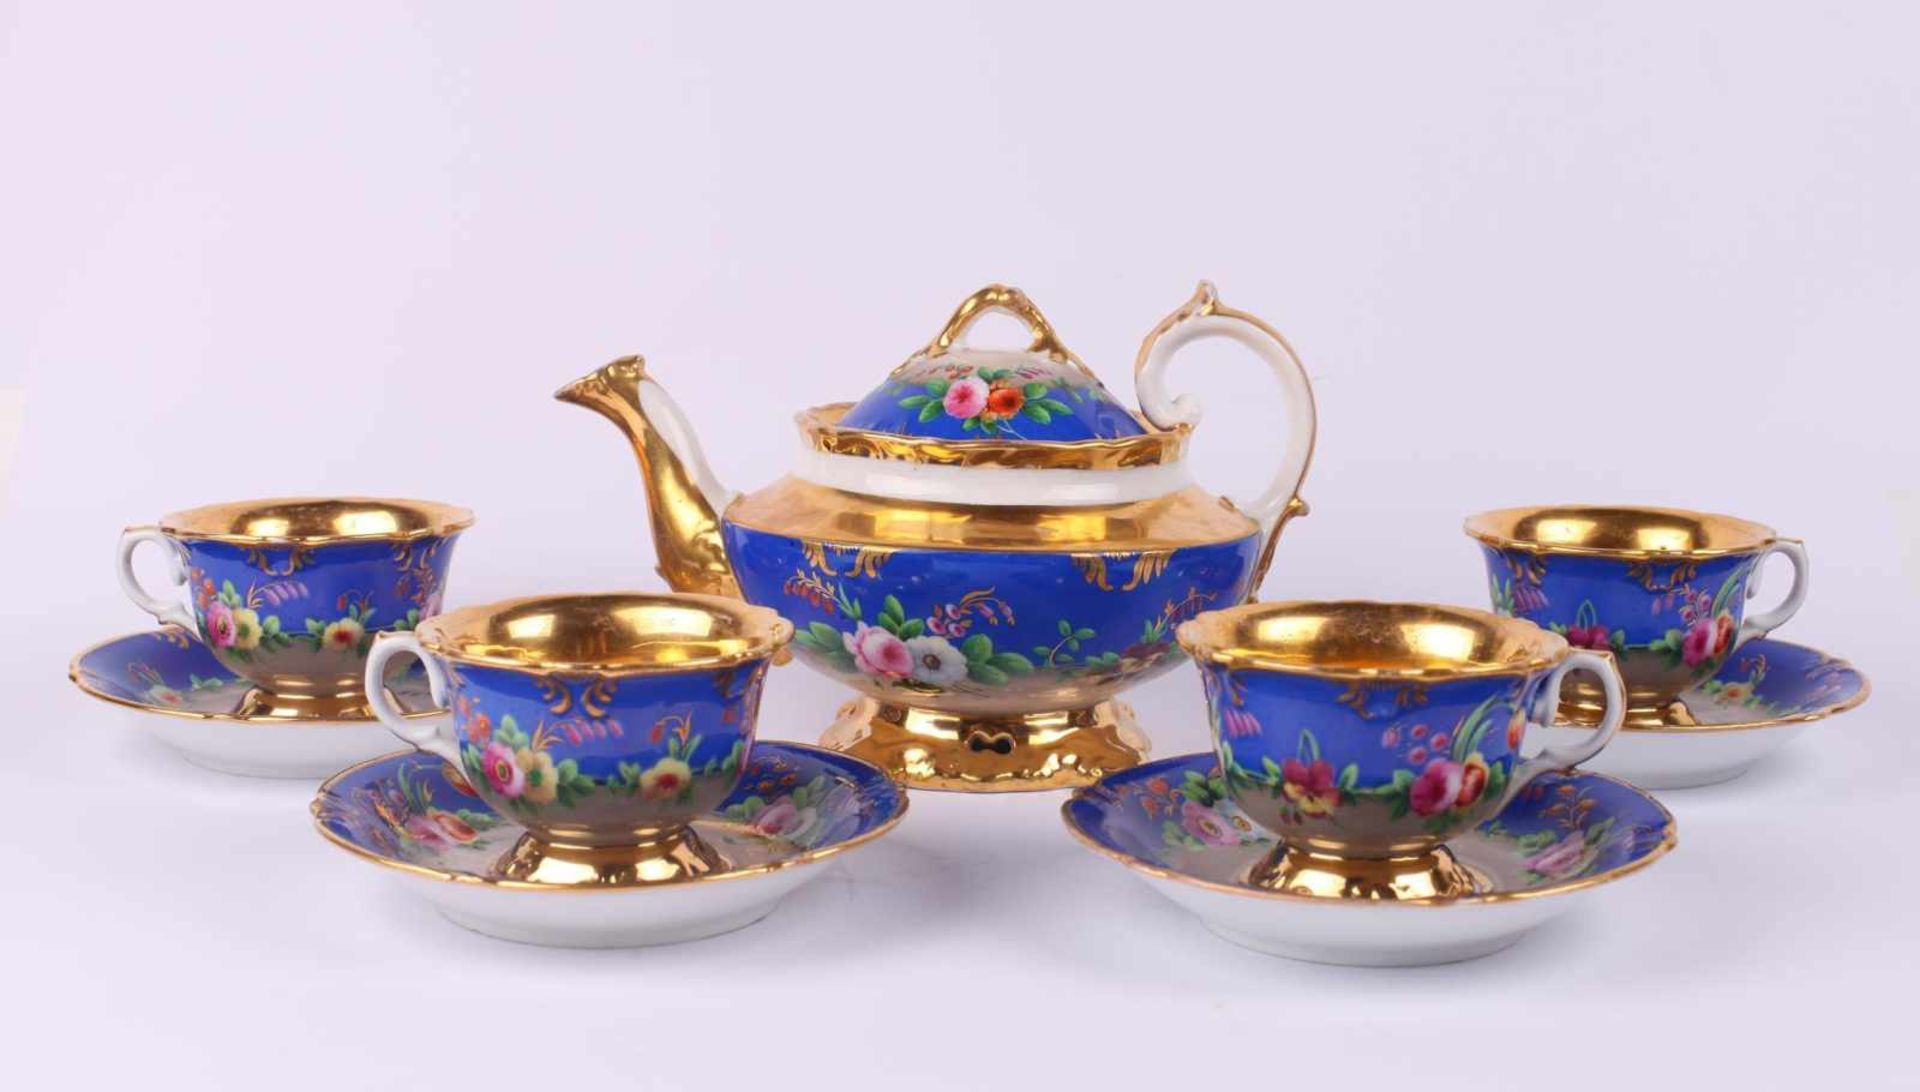 Tea set. 16 pieces: six tea cup and saucer sets, one teapot, one sugar bowl, one milk jug, one dish. - Image 20 of 27